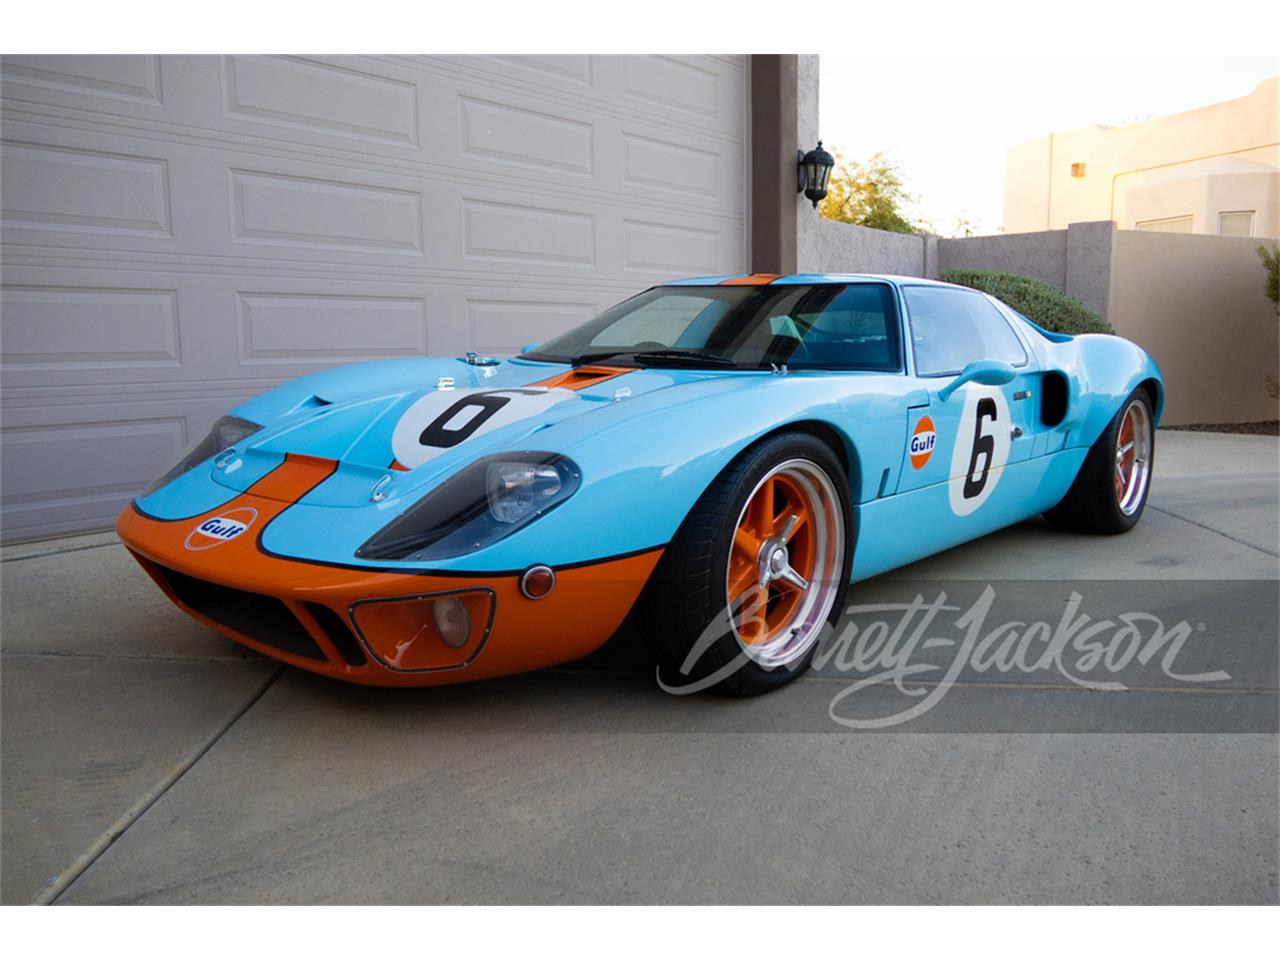 For Sale at Auction: 1965 Ford GT40 in Scottsdale, Arizona for sale in Scottsdale, AZ